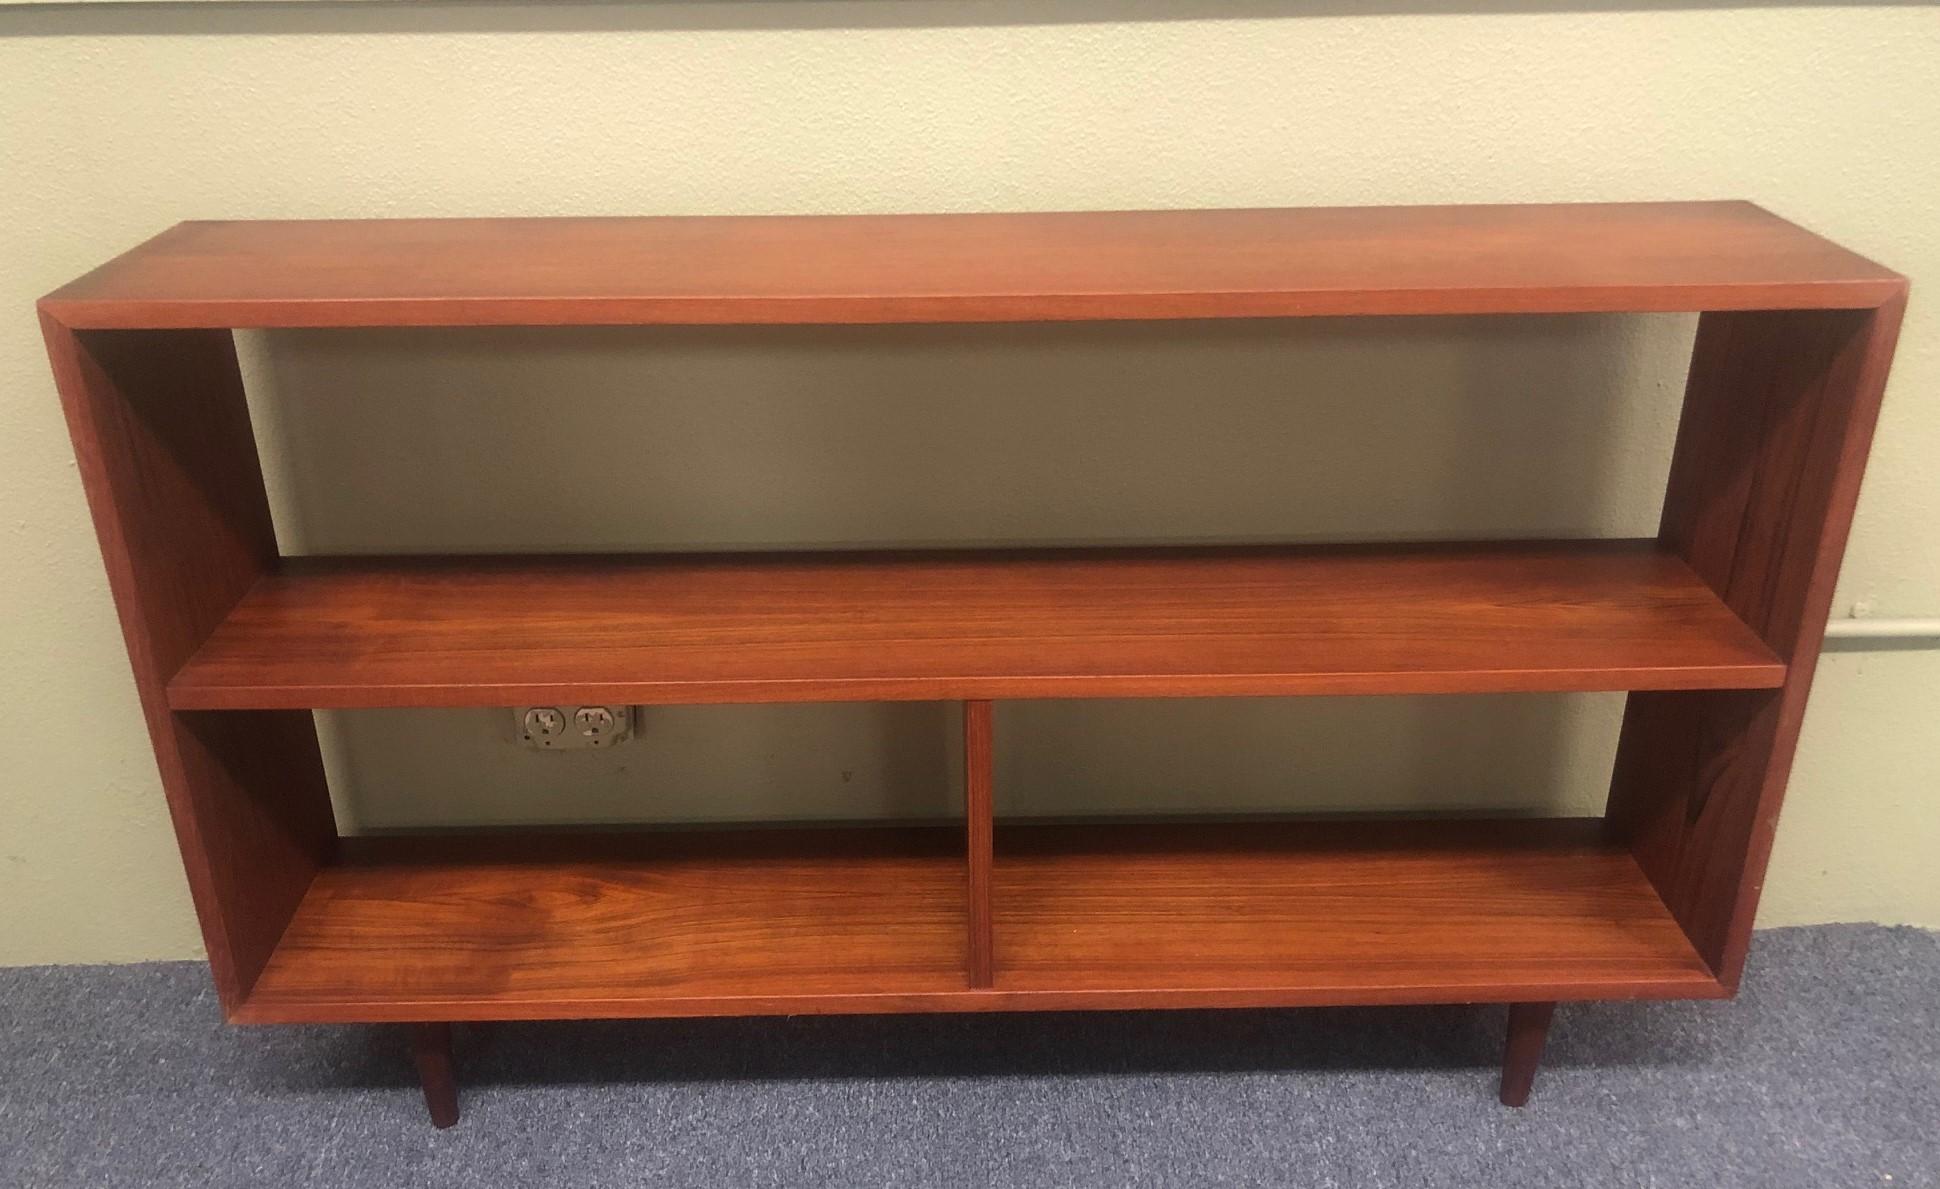 Canadian Mid-Century Modern Backless Low Profile Teak Bookcase with Tapered Legs